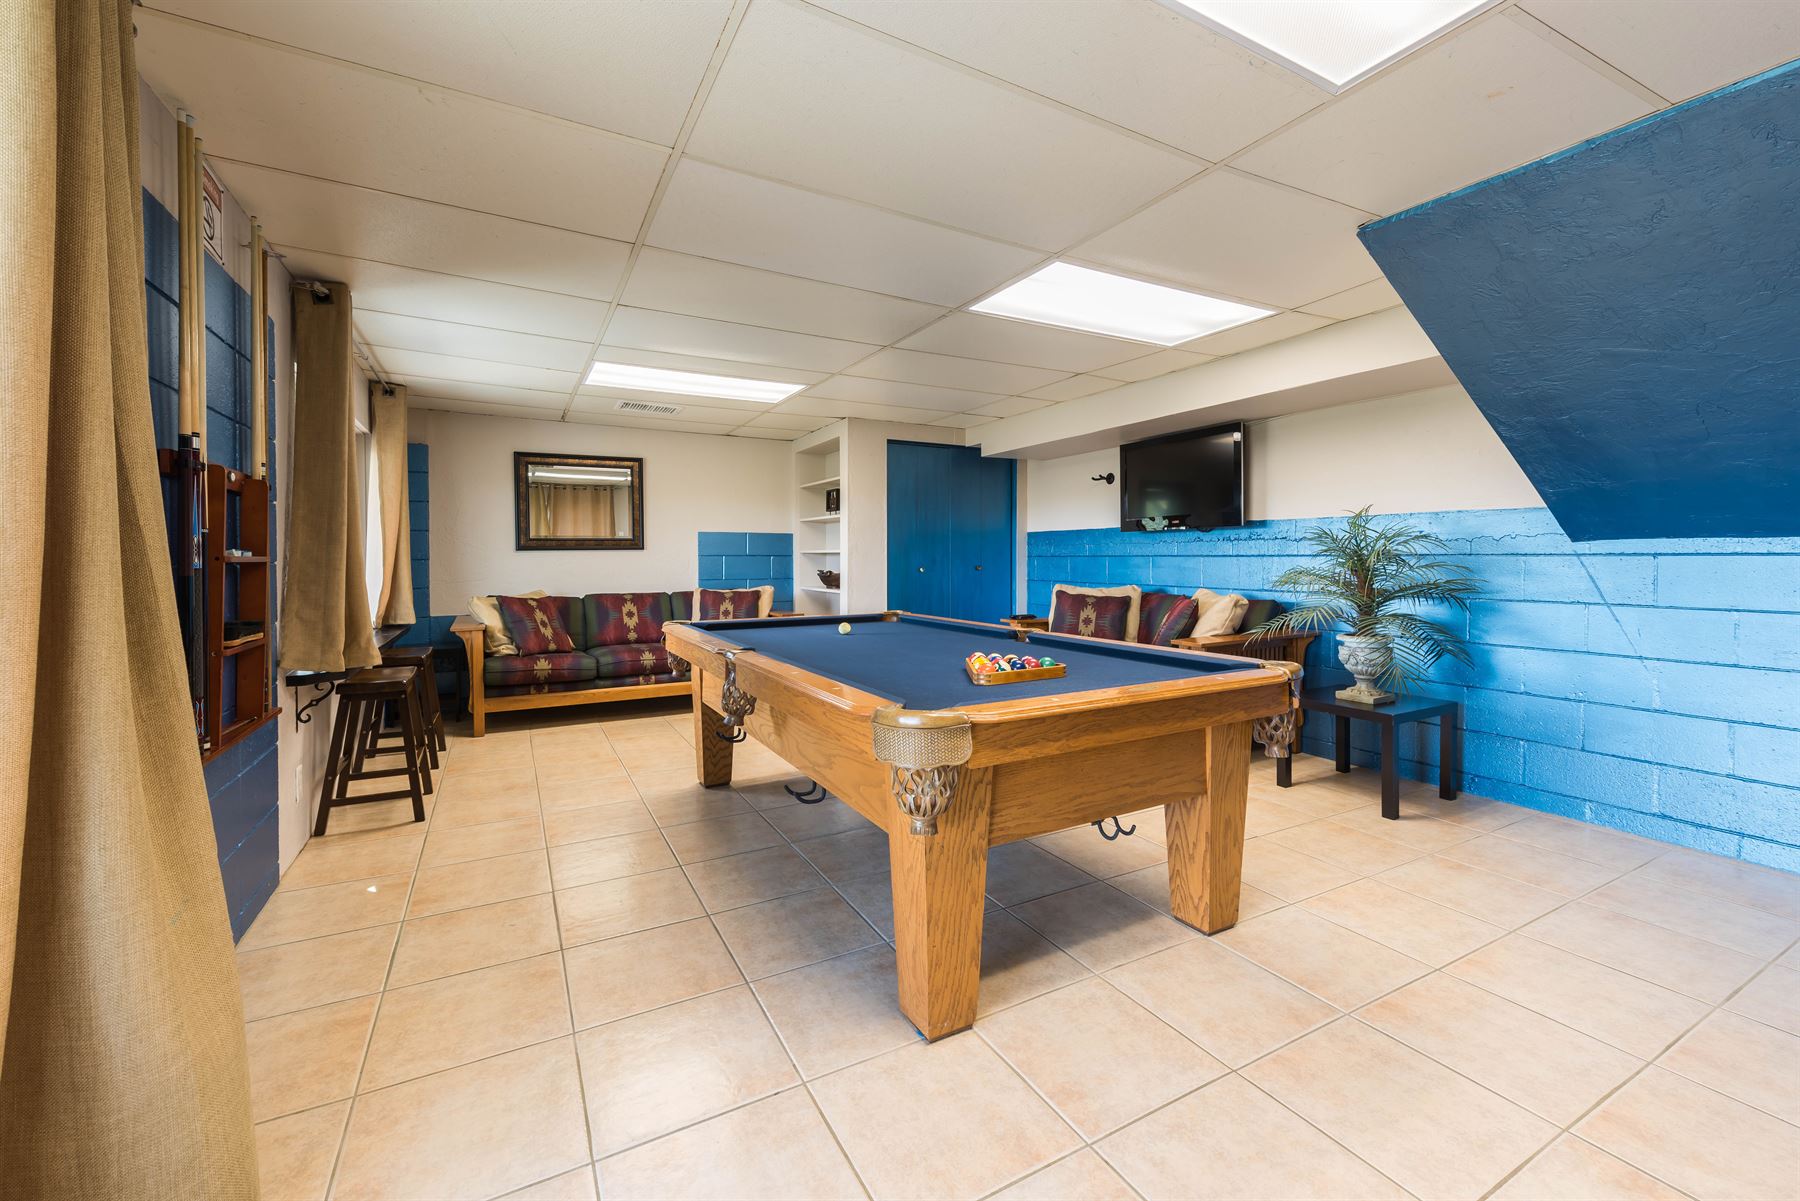 Oceanview Hideaway - Interior - Game room with pool table and two couches as well as a mounted TV